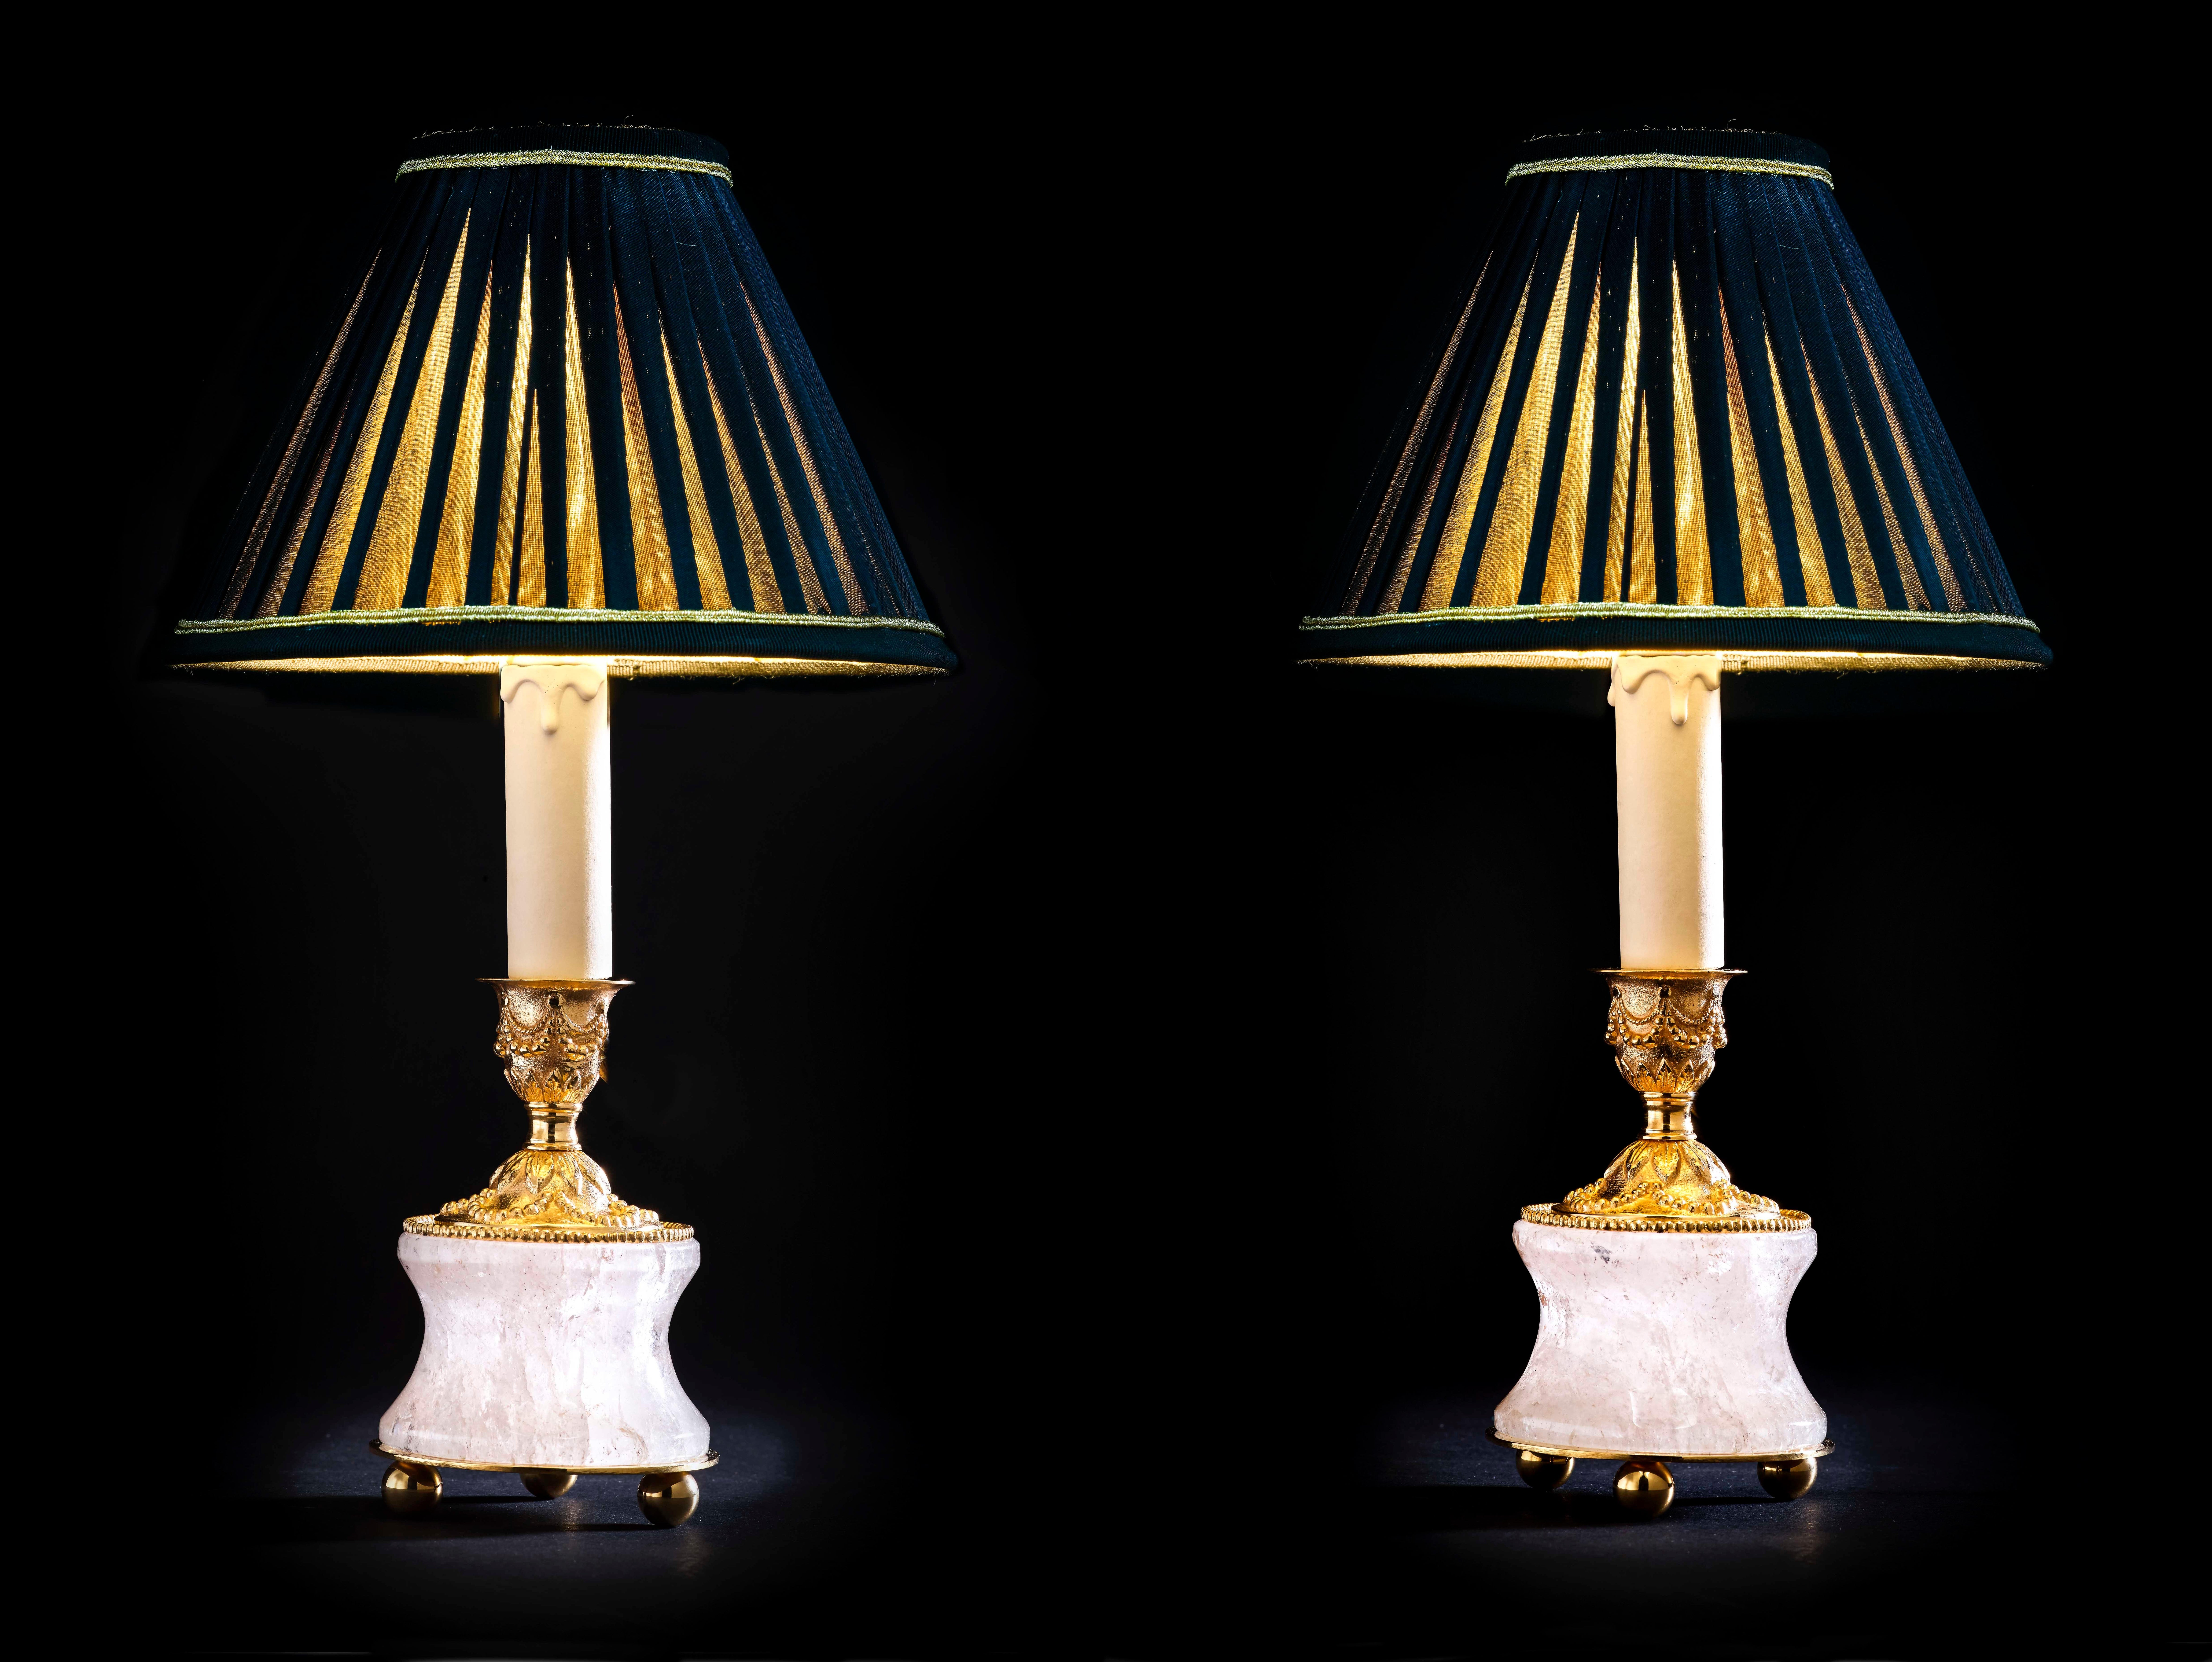 Rock crystal Louis XVI style 24-karat ormolu gilding bronze black lampshades made by Alexandre Vossion.
This model can be also used as candlesticks to make your dining table so chic ...
Others colors for the lampshades are also available and three